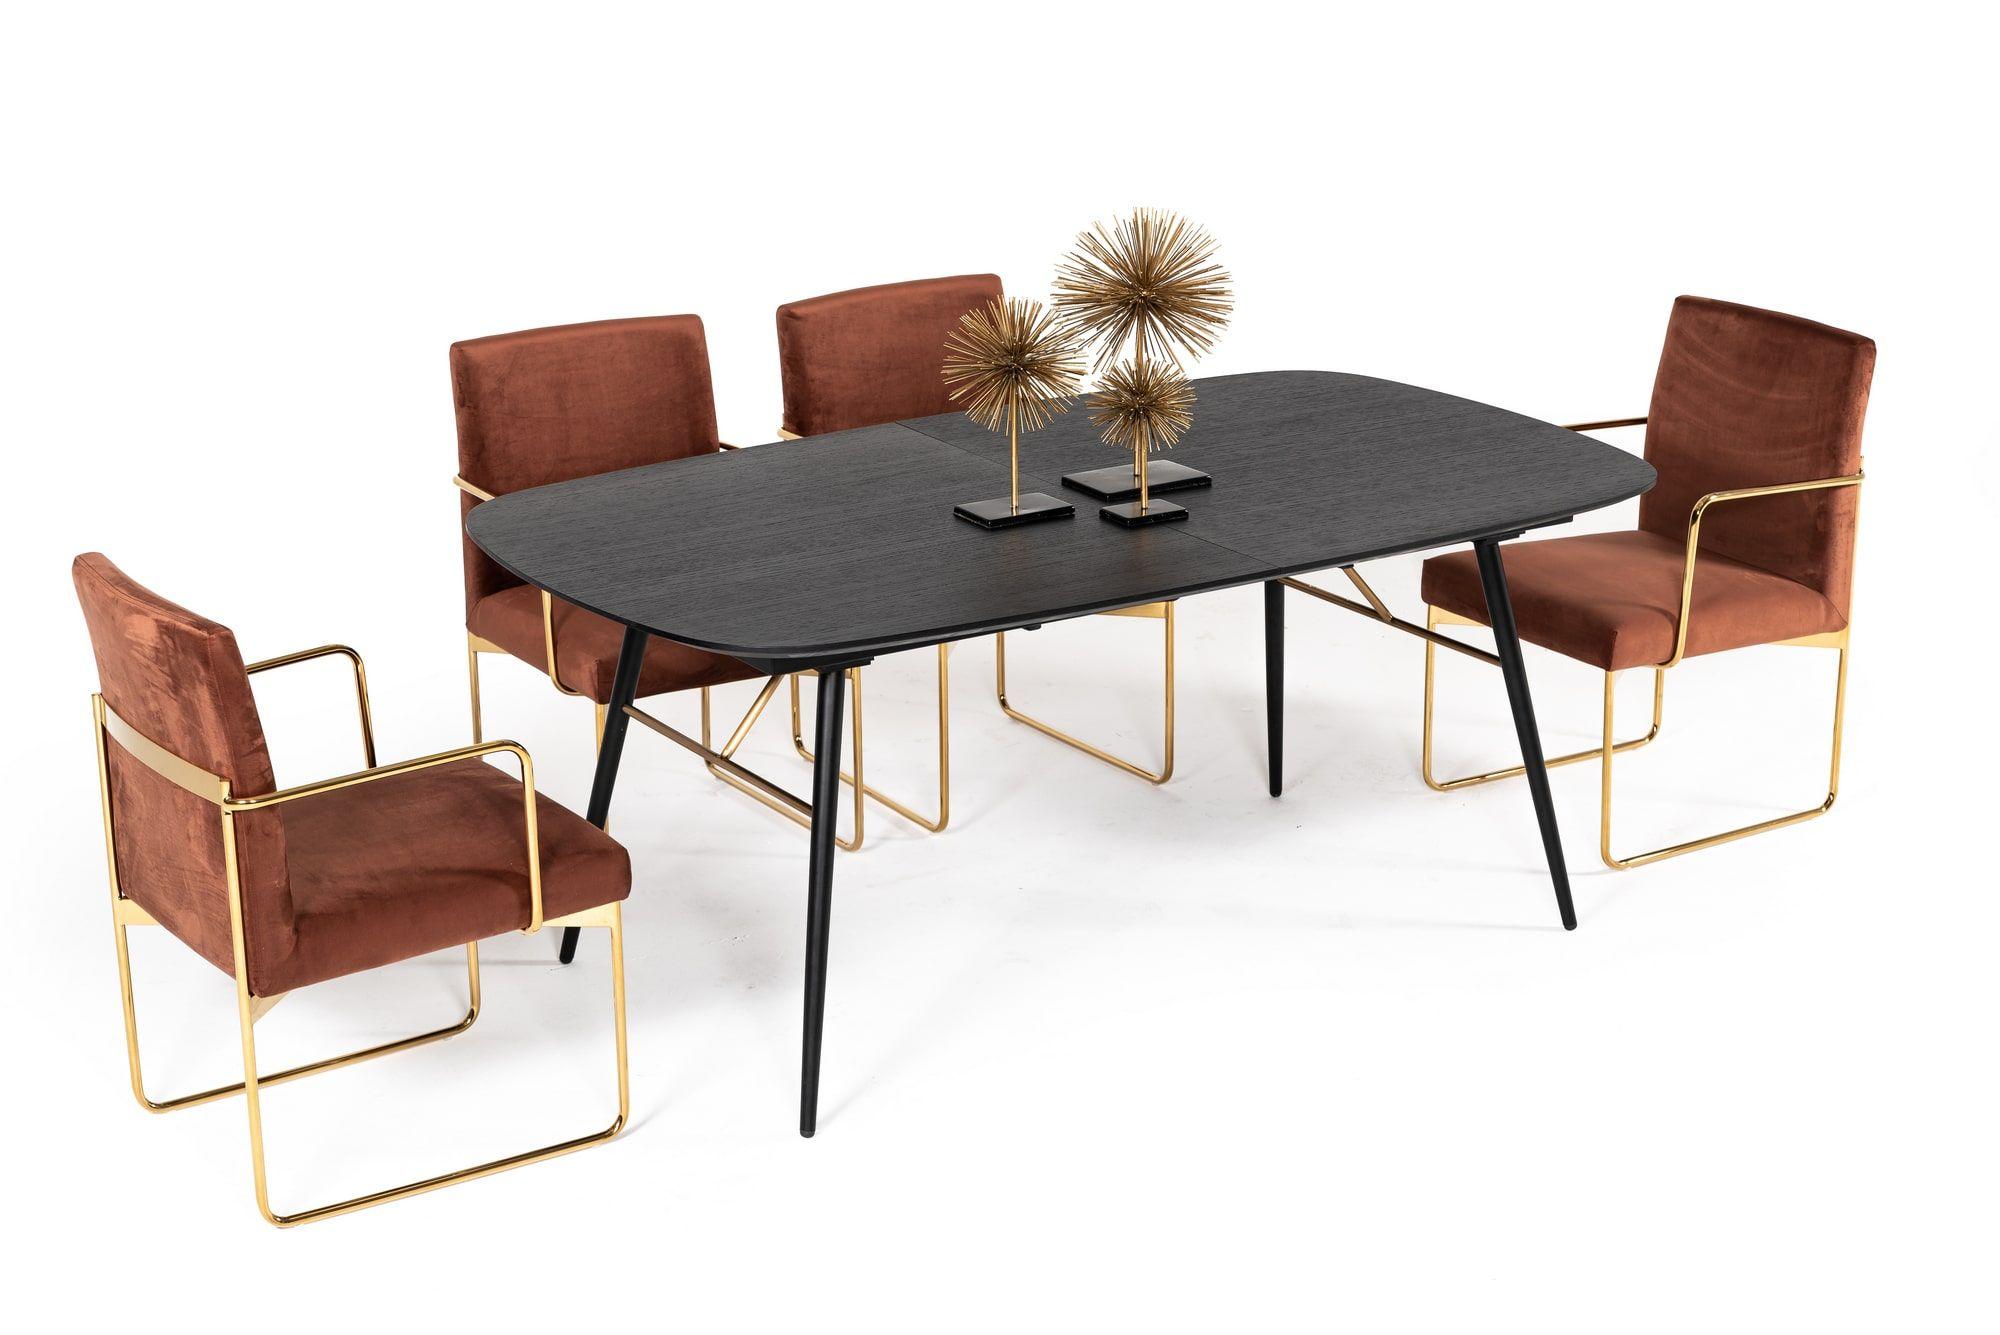 Contemporary, Modern Dining Table VGDWJ3498 VGDWJ3498 in Black 